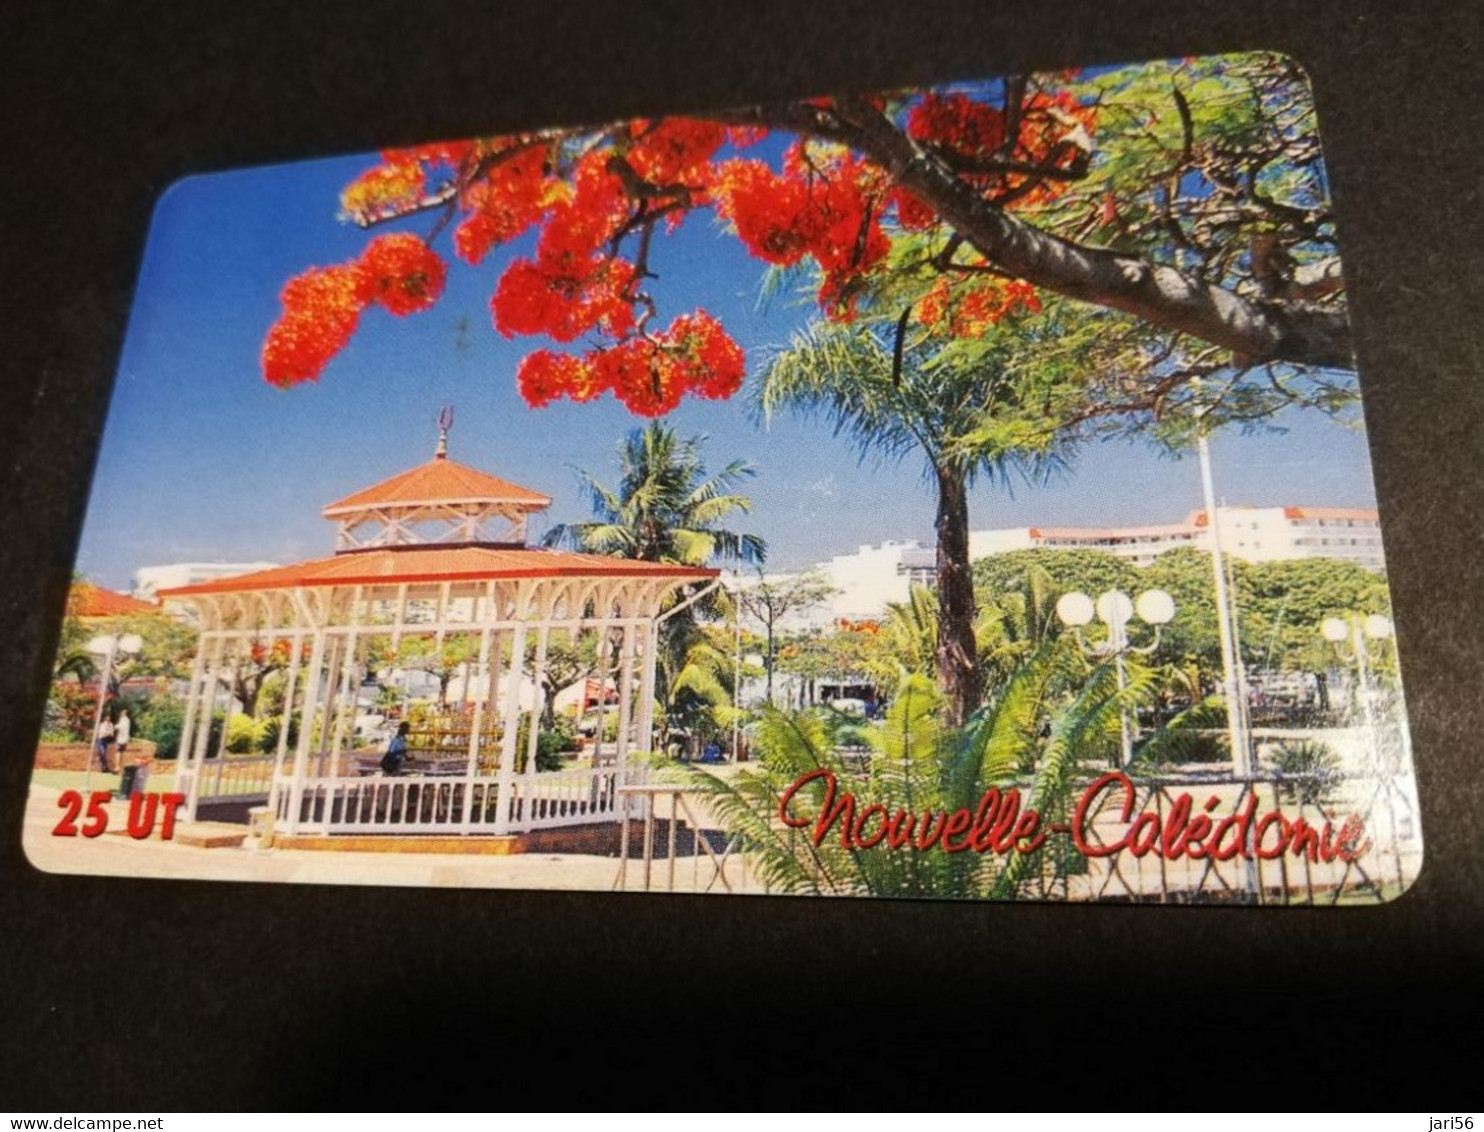 NOUVELLE CALEDONIA  CHIP CARD 25  UNITS  KIOSQUE A MUSIC AND FLOWERS IN TREE       ** 4195 ** - New Caledonia